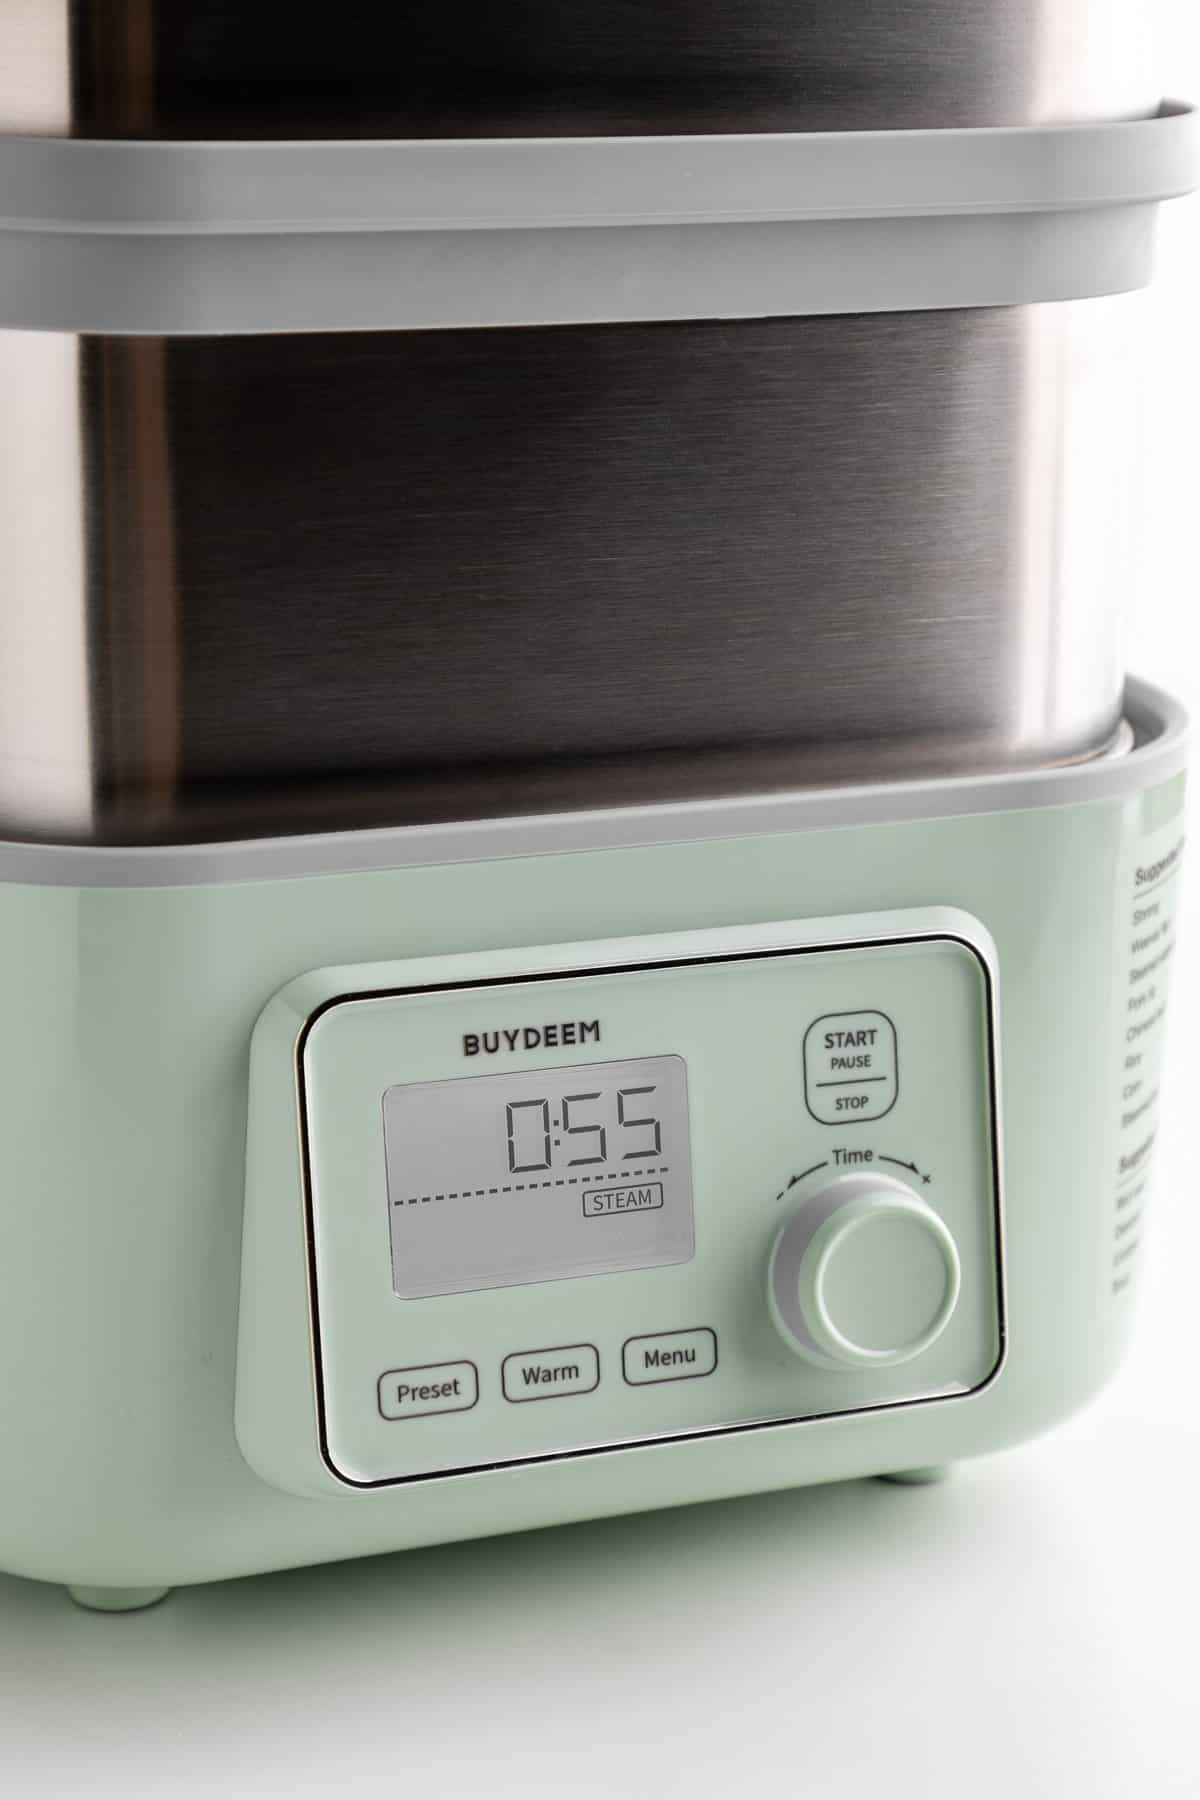 the Buydeem two-tier intelligent food steamer on slow cook mode for 55 minutes